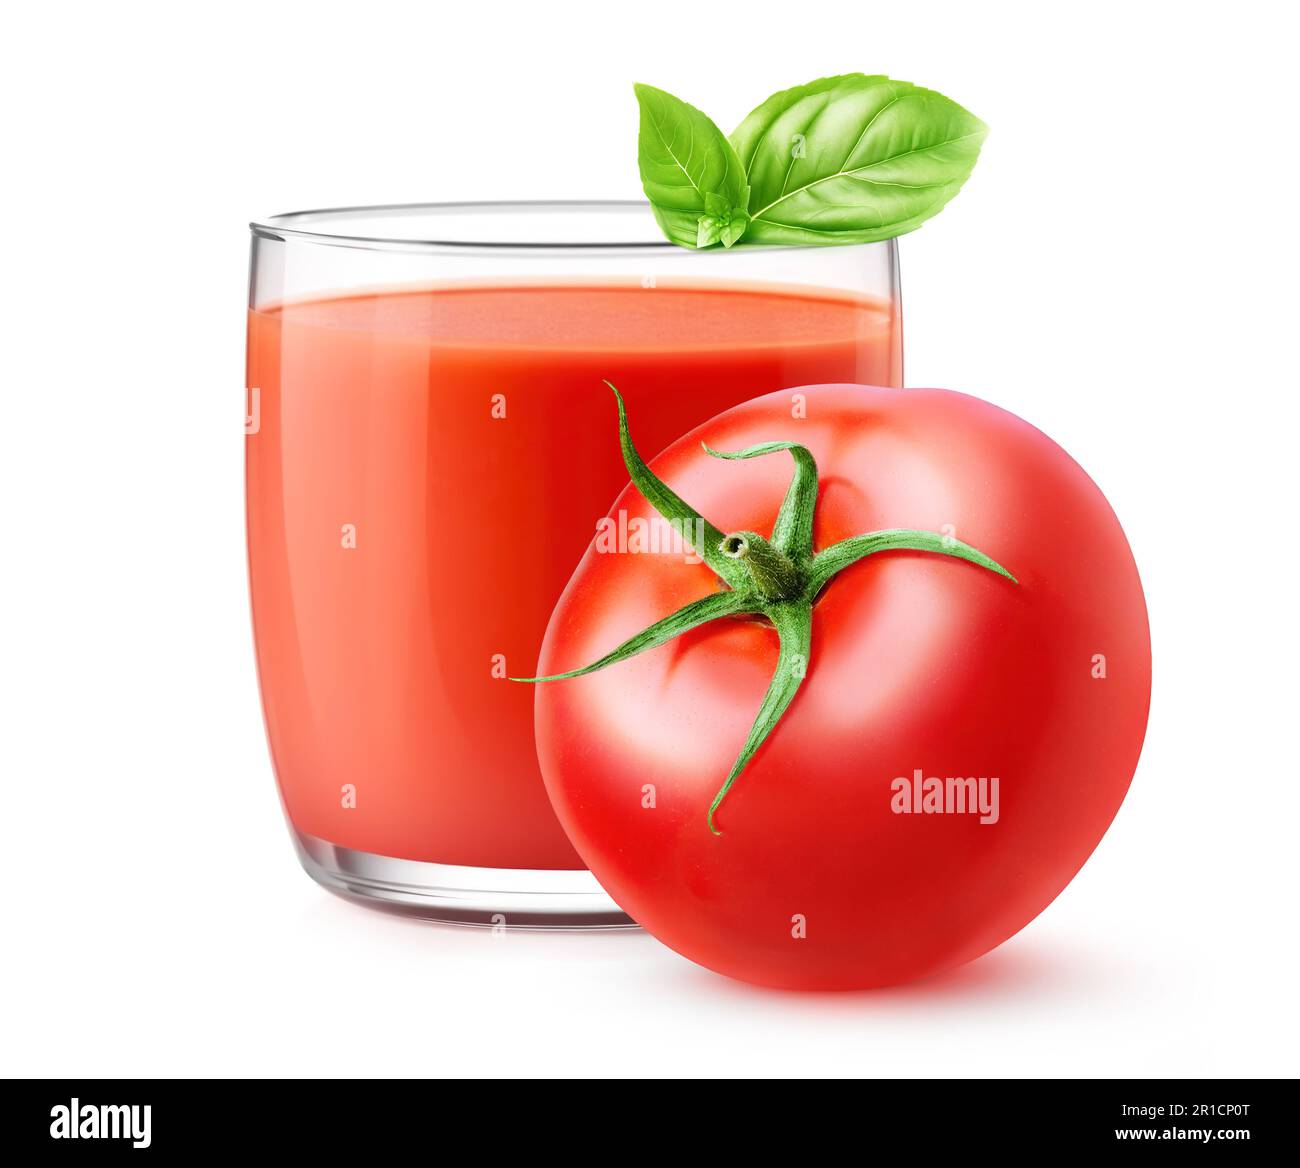 Fresh tomato, basil leaf and glass of juice, isolated over white Stock Photo